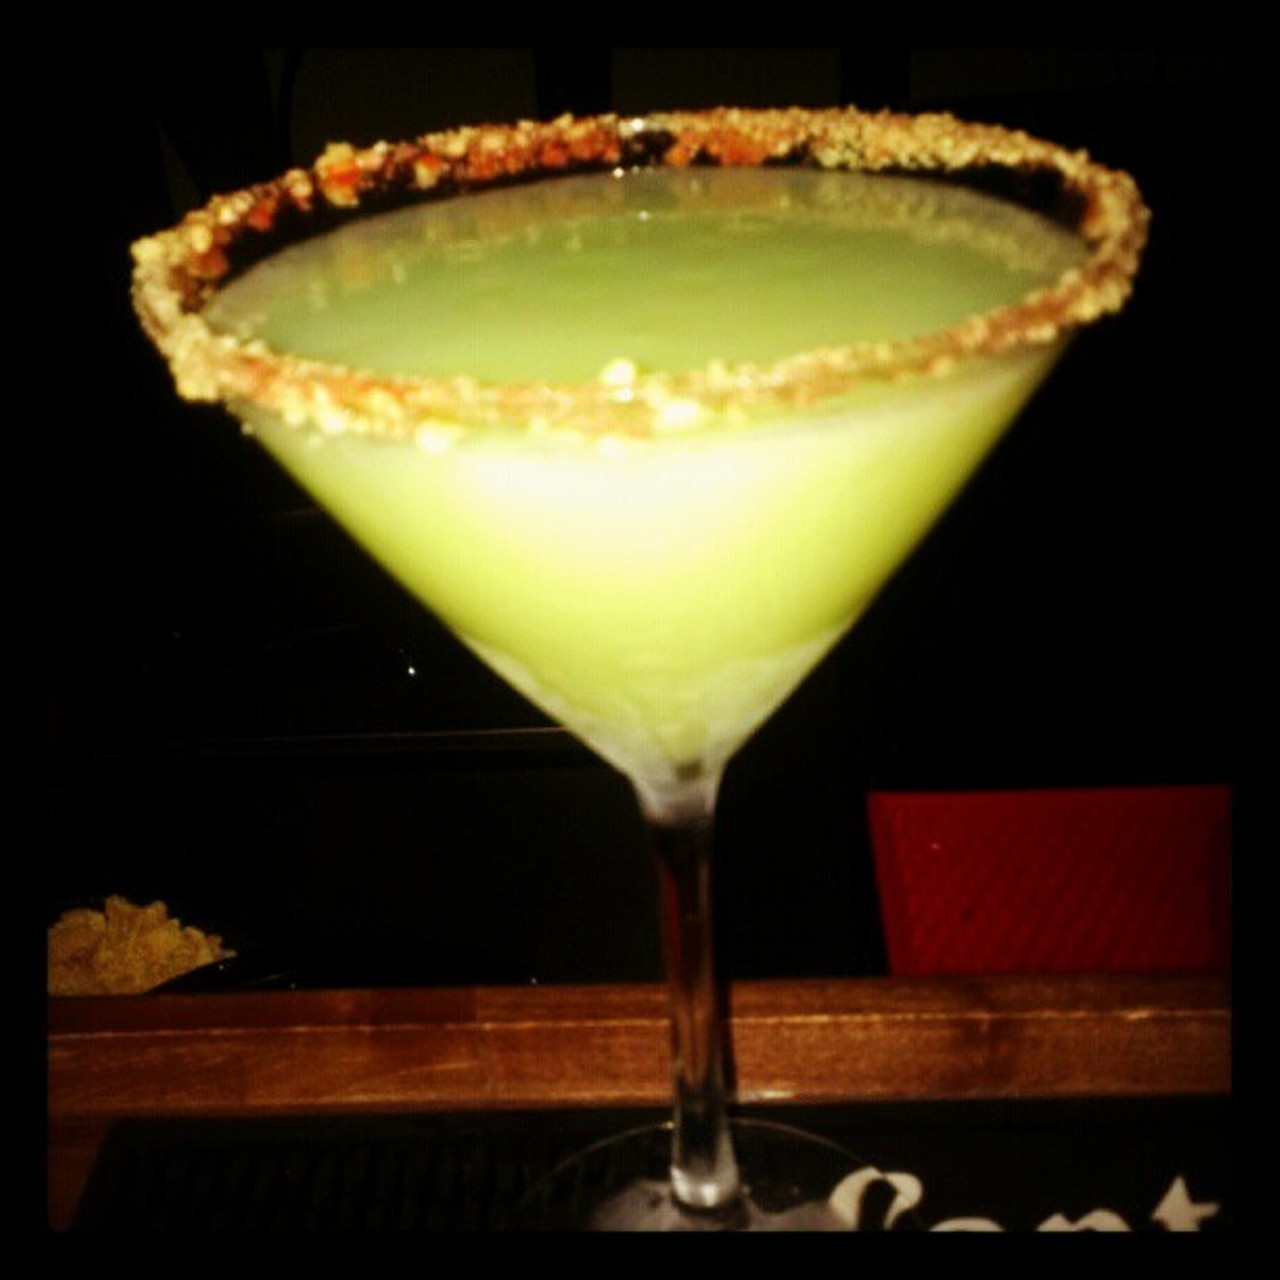 @aimeevitek Day dreaming about this key lime martini from @ontherocks #latergram #owwednesday #orlandoweekly